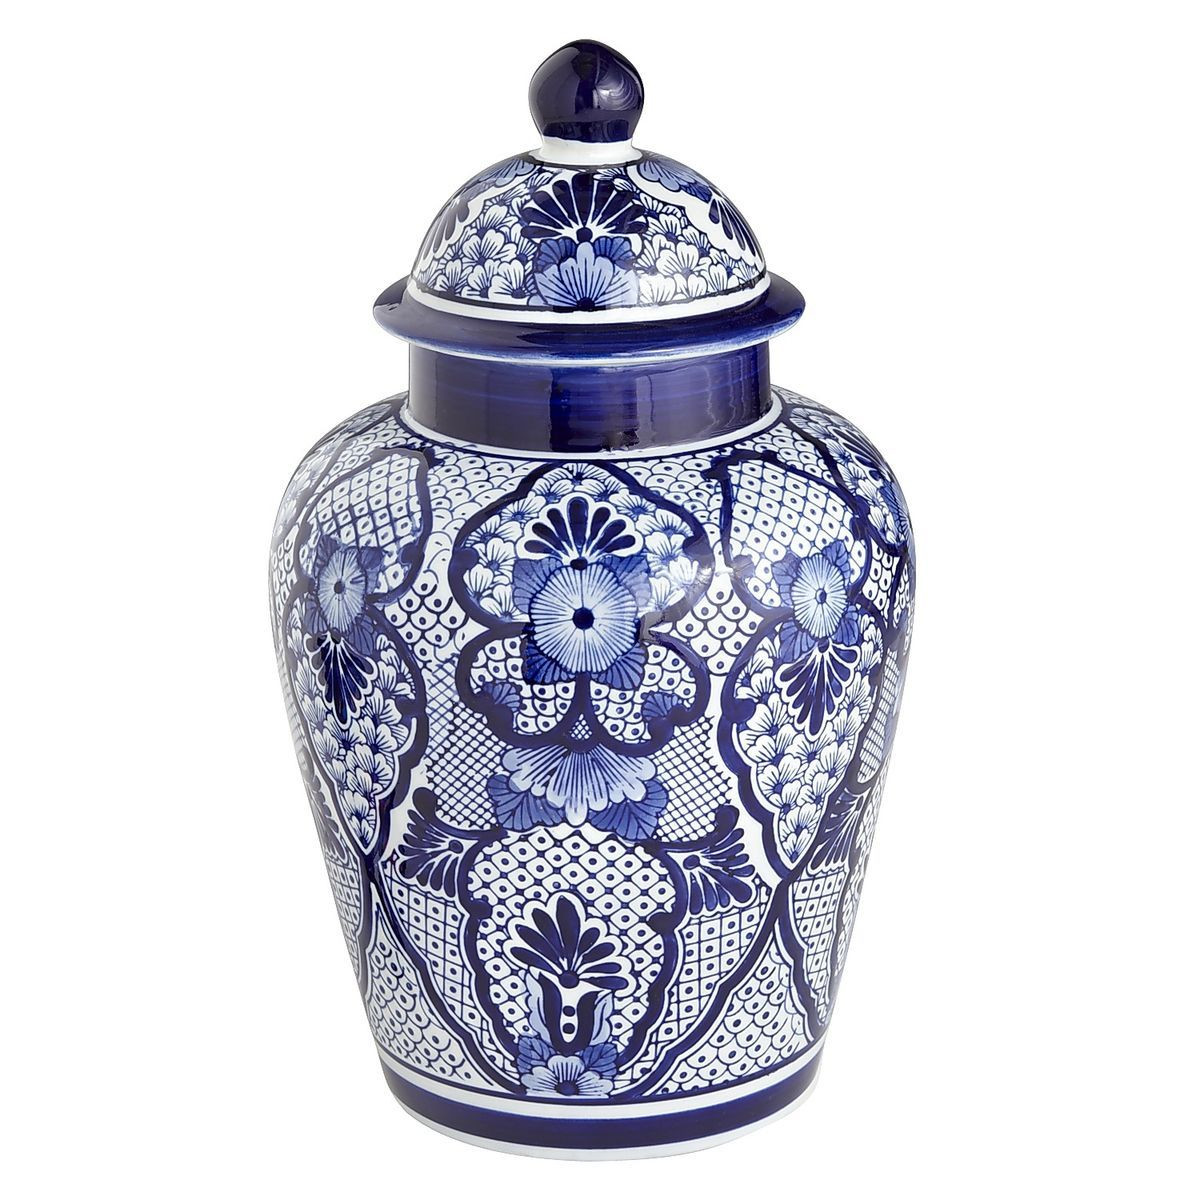 10 Popular Blue and White Decorative Vases 2024 free download blue and white decorative vases of blue white temple jar pier 1 imports the blue house down the in blue white temple jar pier 1 imports